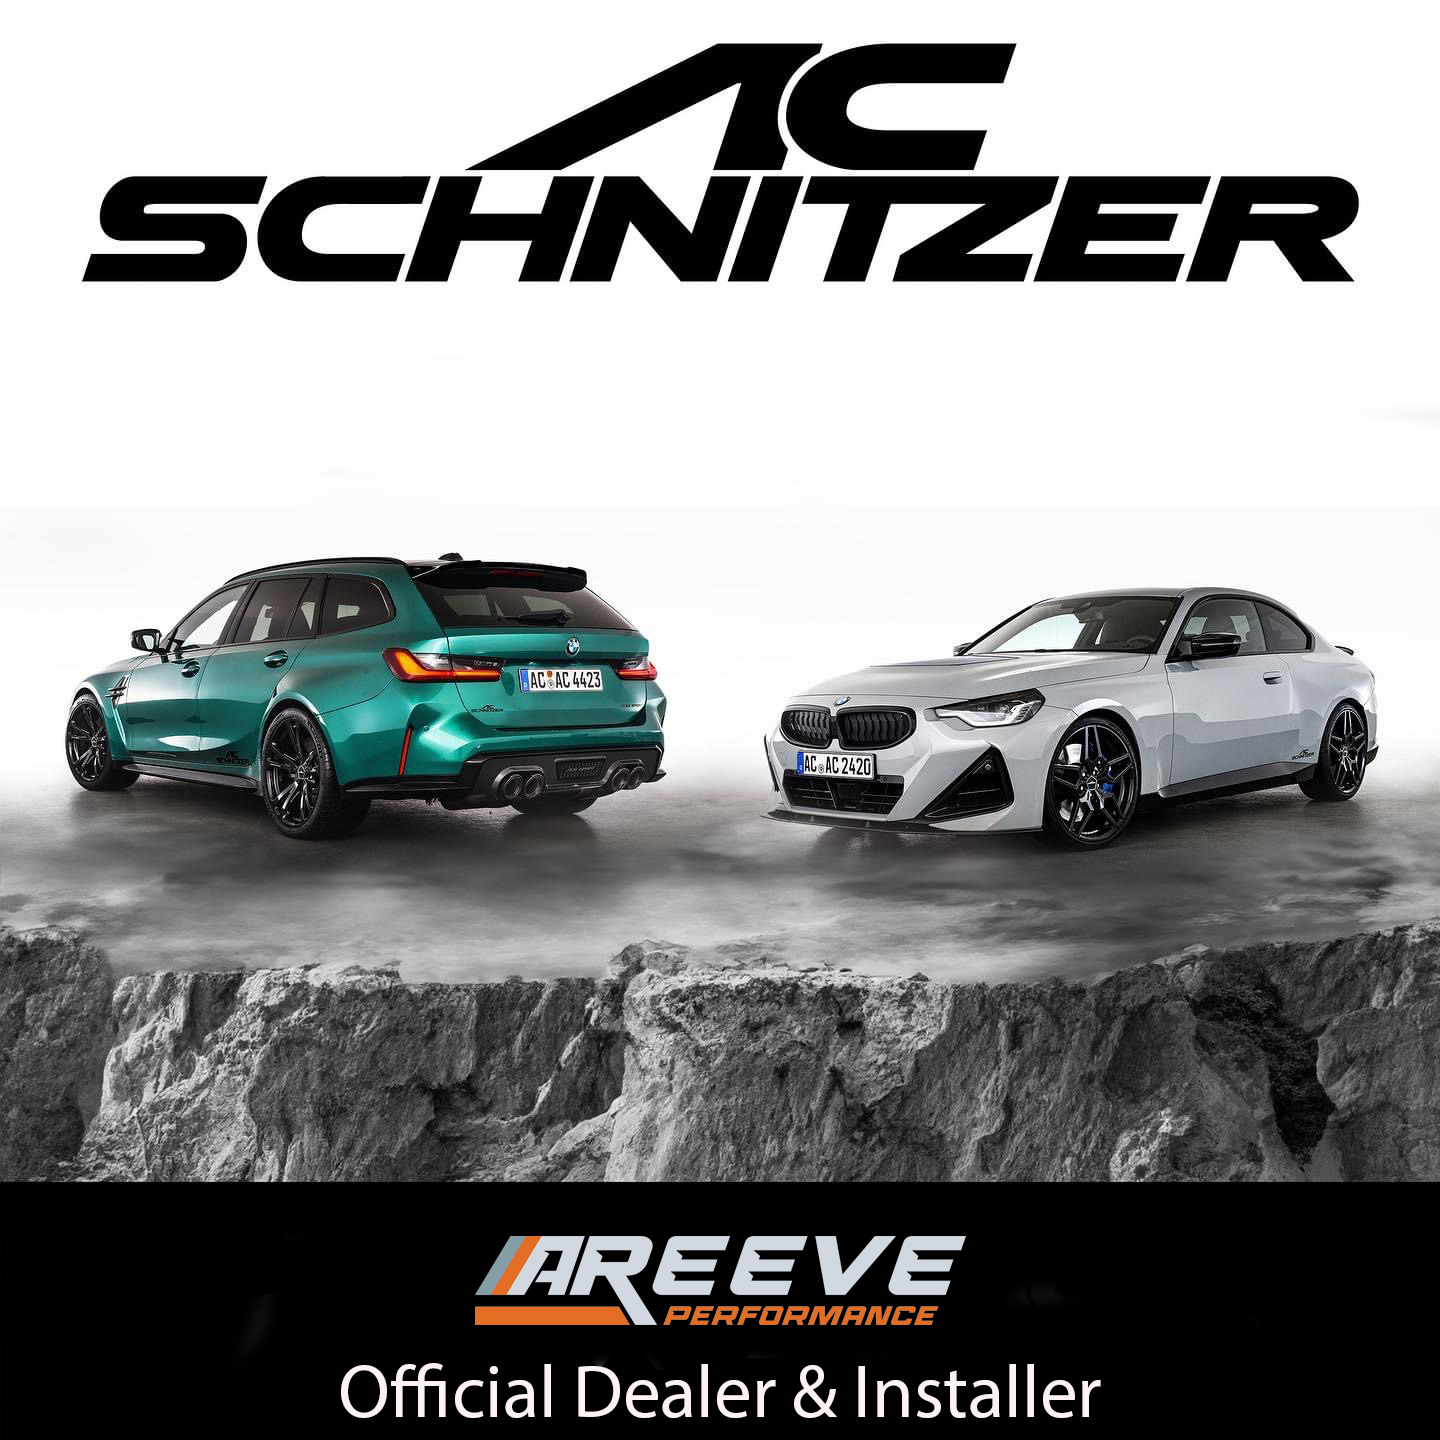 AReeve appointed exclusive dealer & installer for AC Schnitzer In the East of England